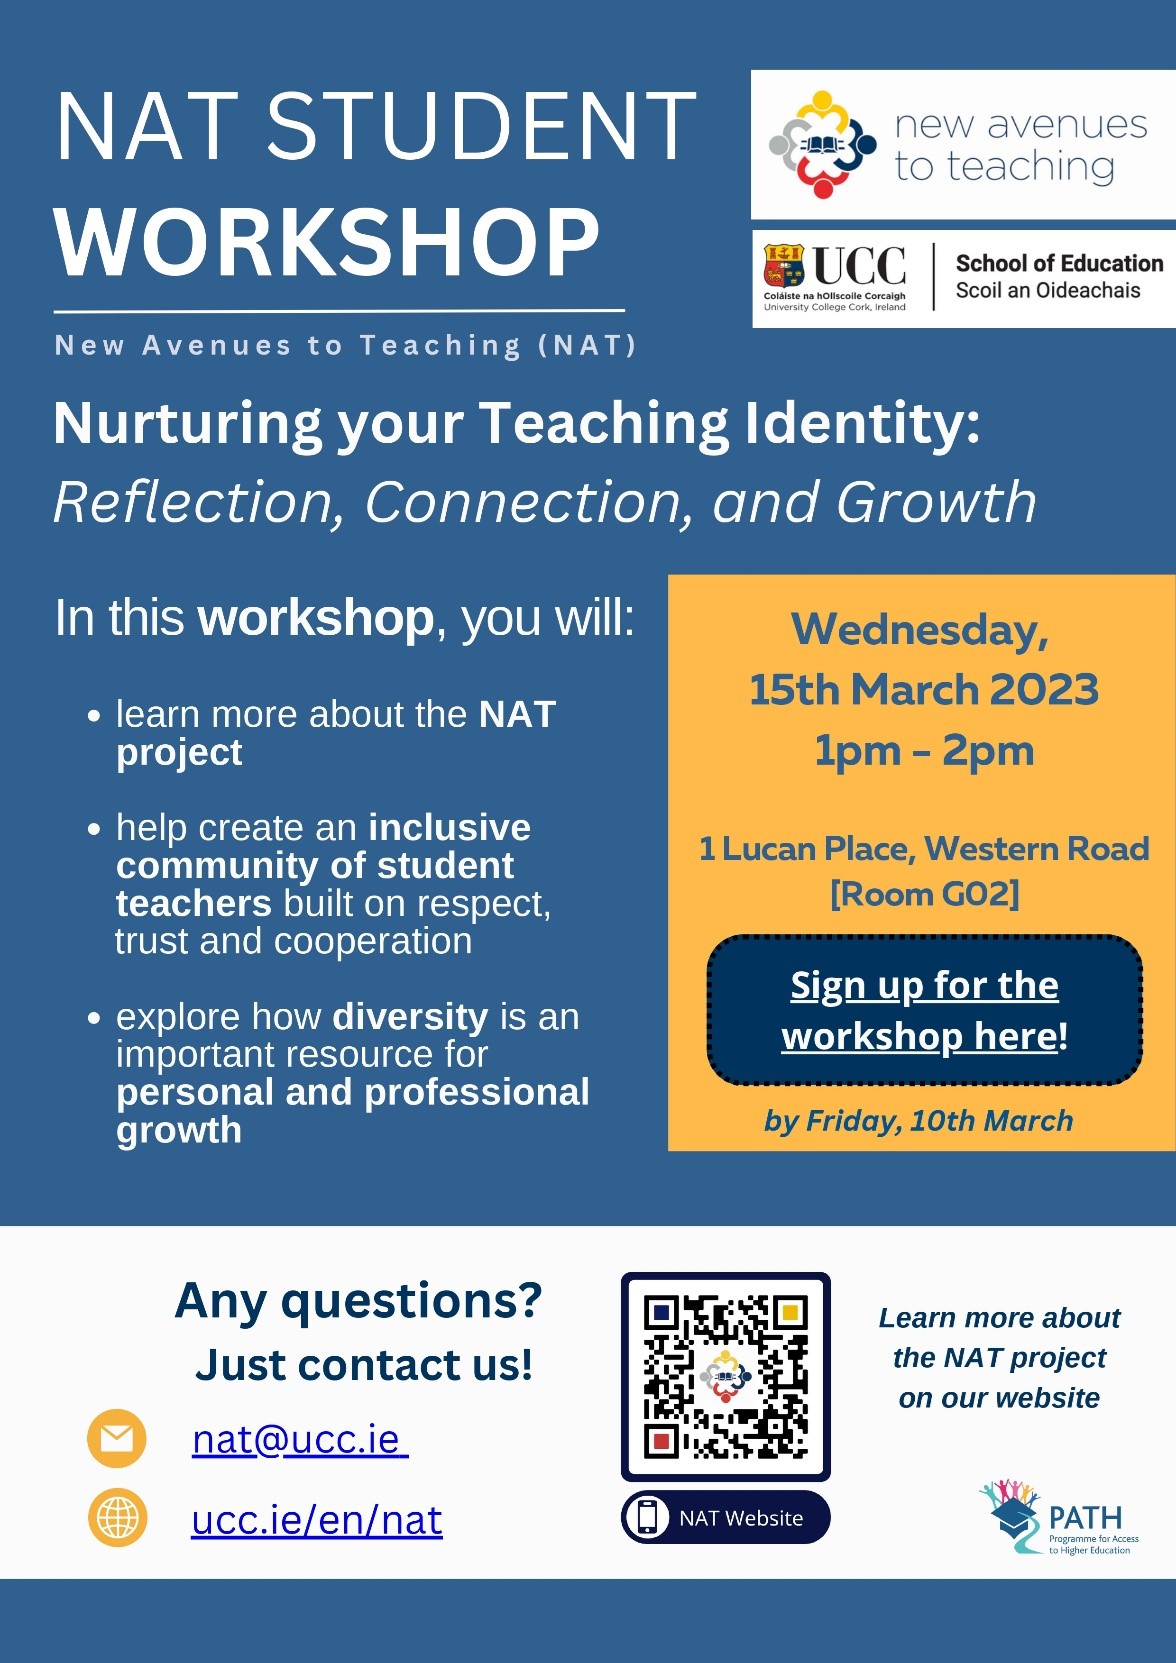 New Avenues to Teaching Student Workshop: Nurturing your Teaching Identity: Reflection, Connection, and Growth